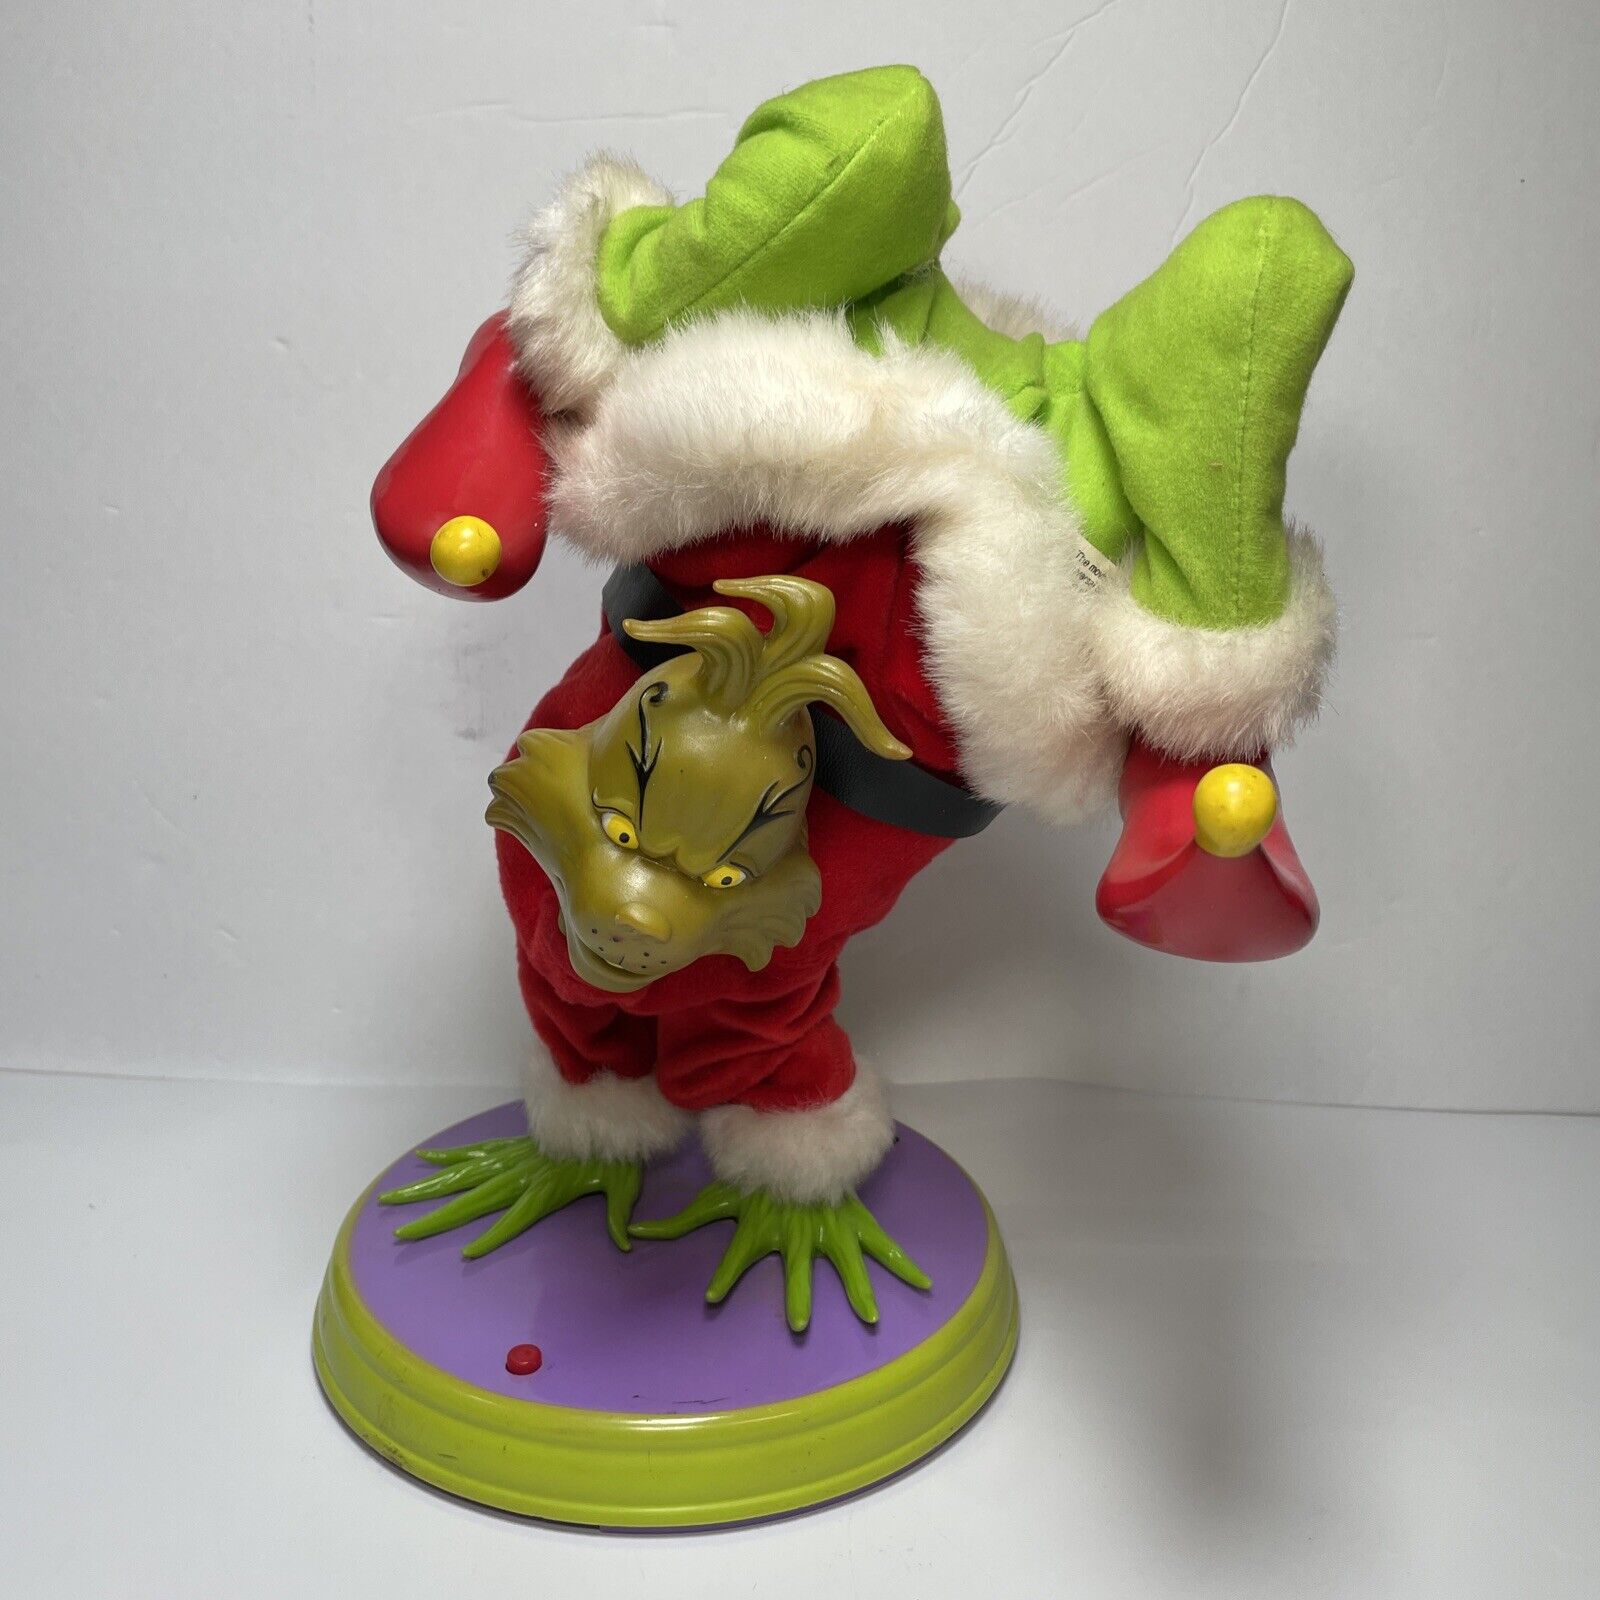 Dr. Seuss How The Grinch Stole Christmas Hand-Standing Singing Grinch 2000 Gemmy